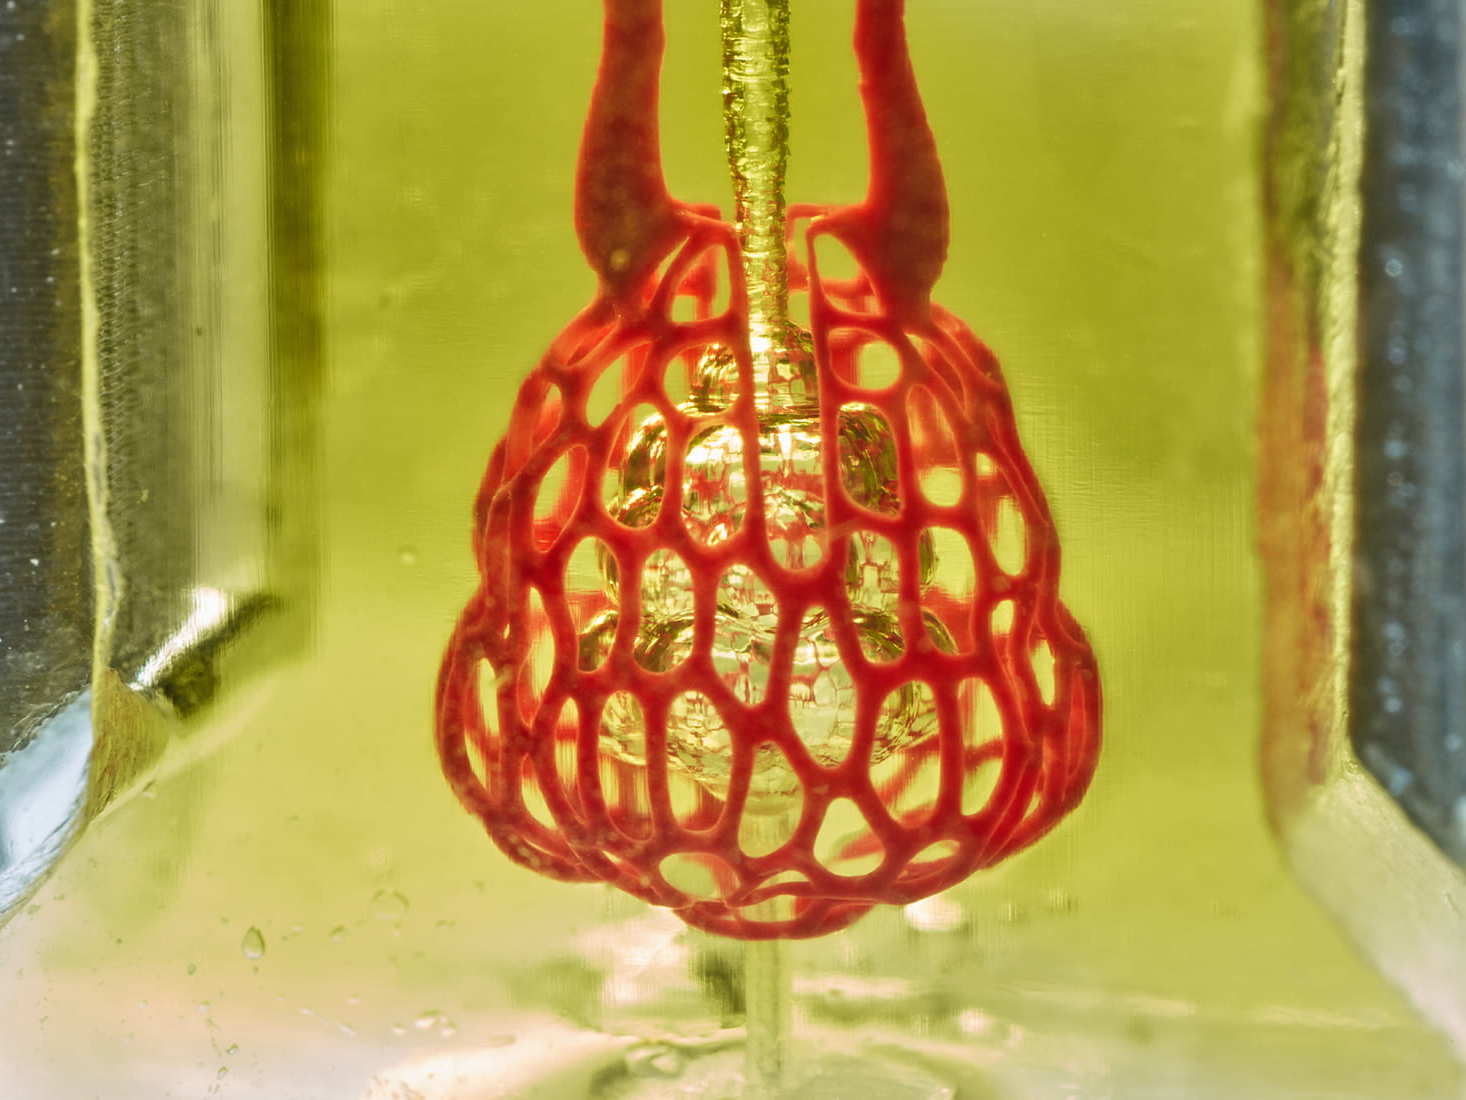 Bioprinting research from the lab of Rice University bioengineer Jordan Miller featured a stunning proof-of-principle -- a scale-model of a lung-mimicking air sac with airways and blood vessels that never touch yet still provide oxygen to red blood cells